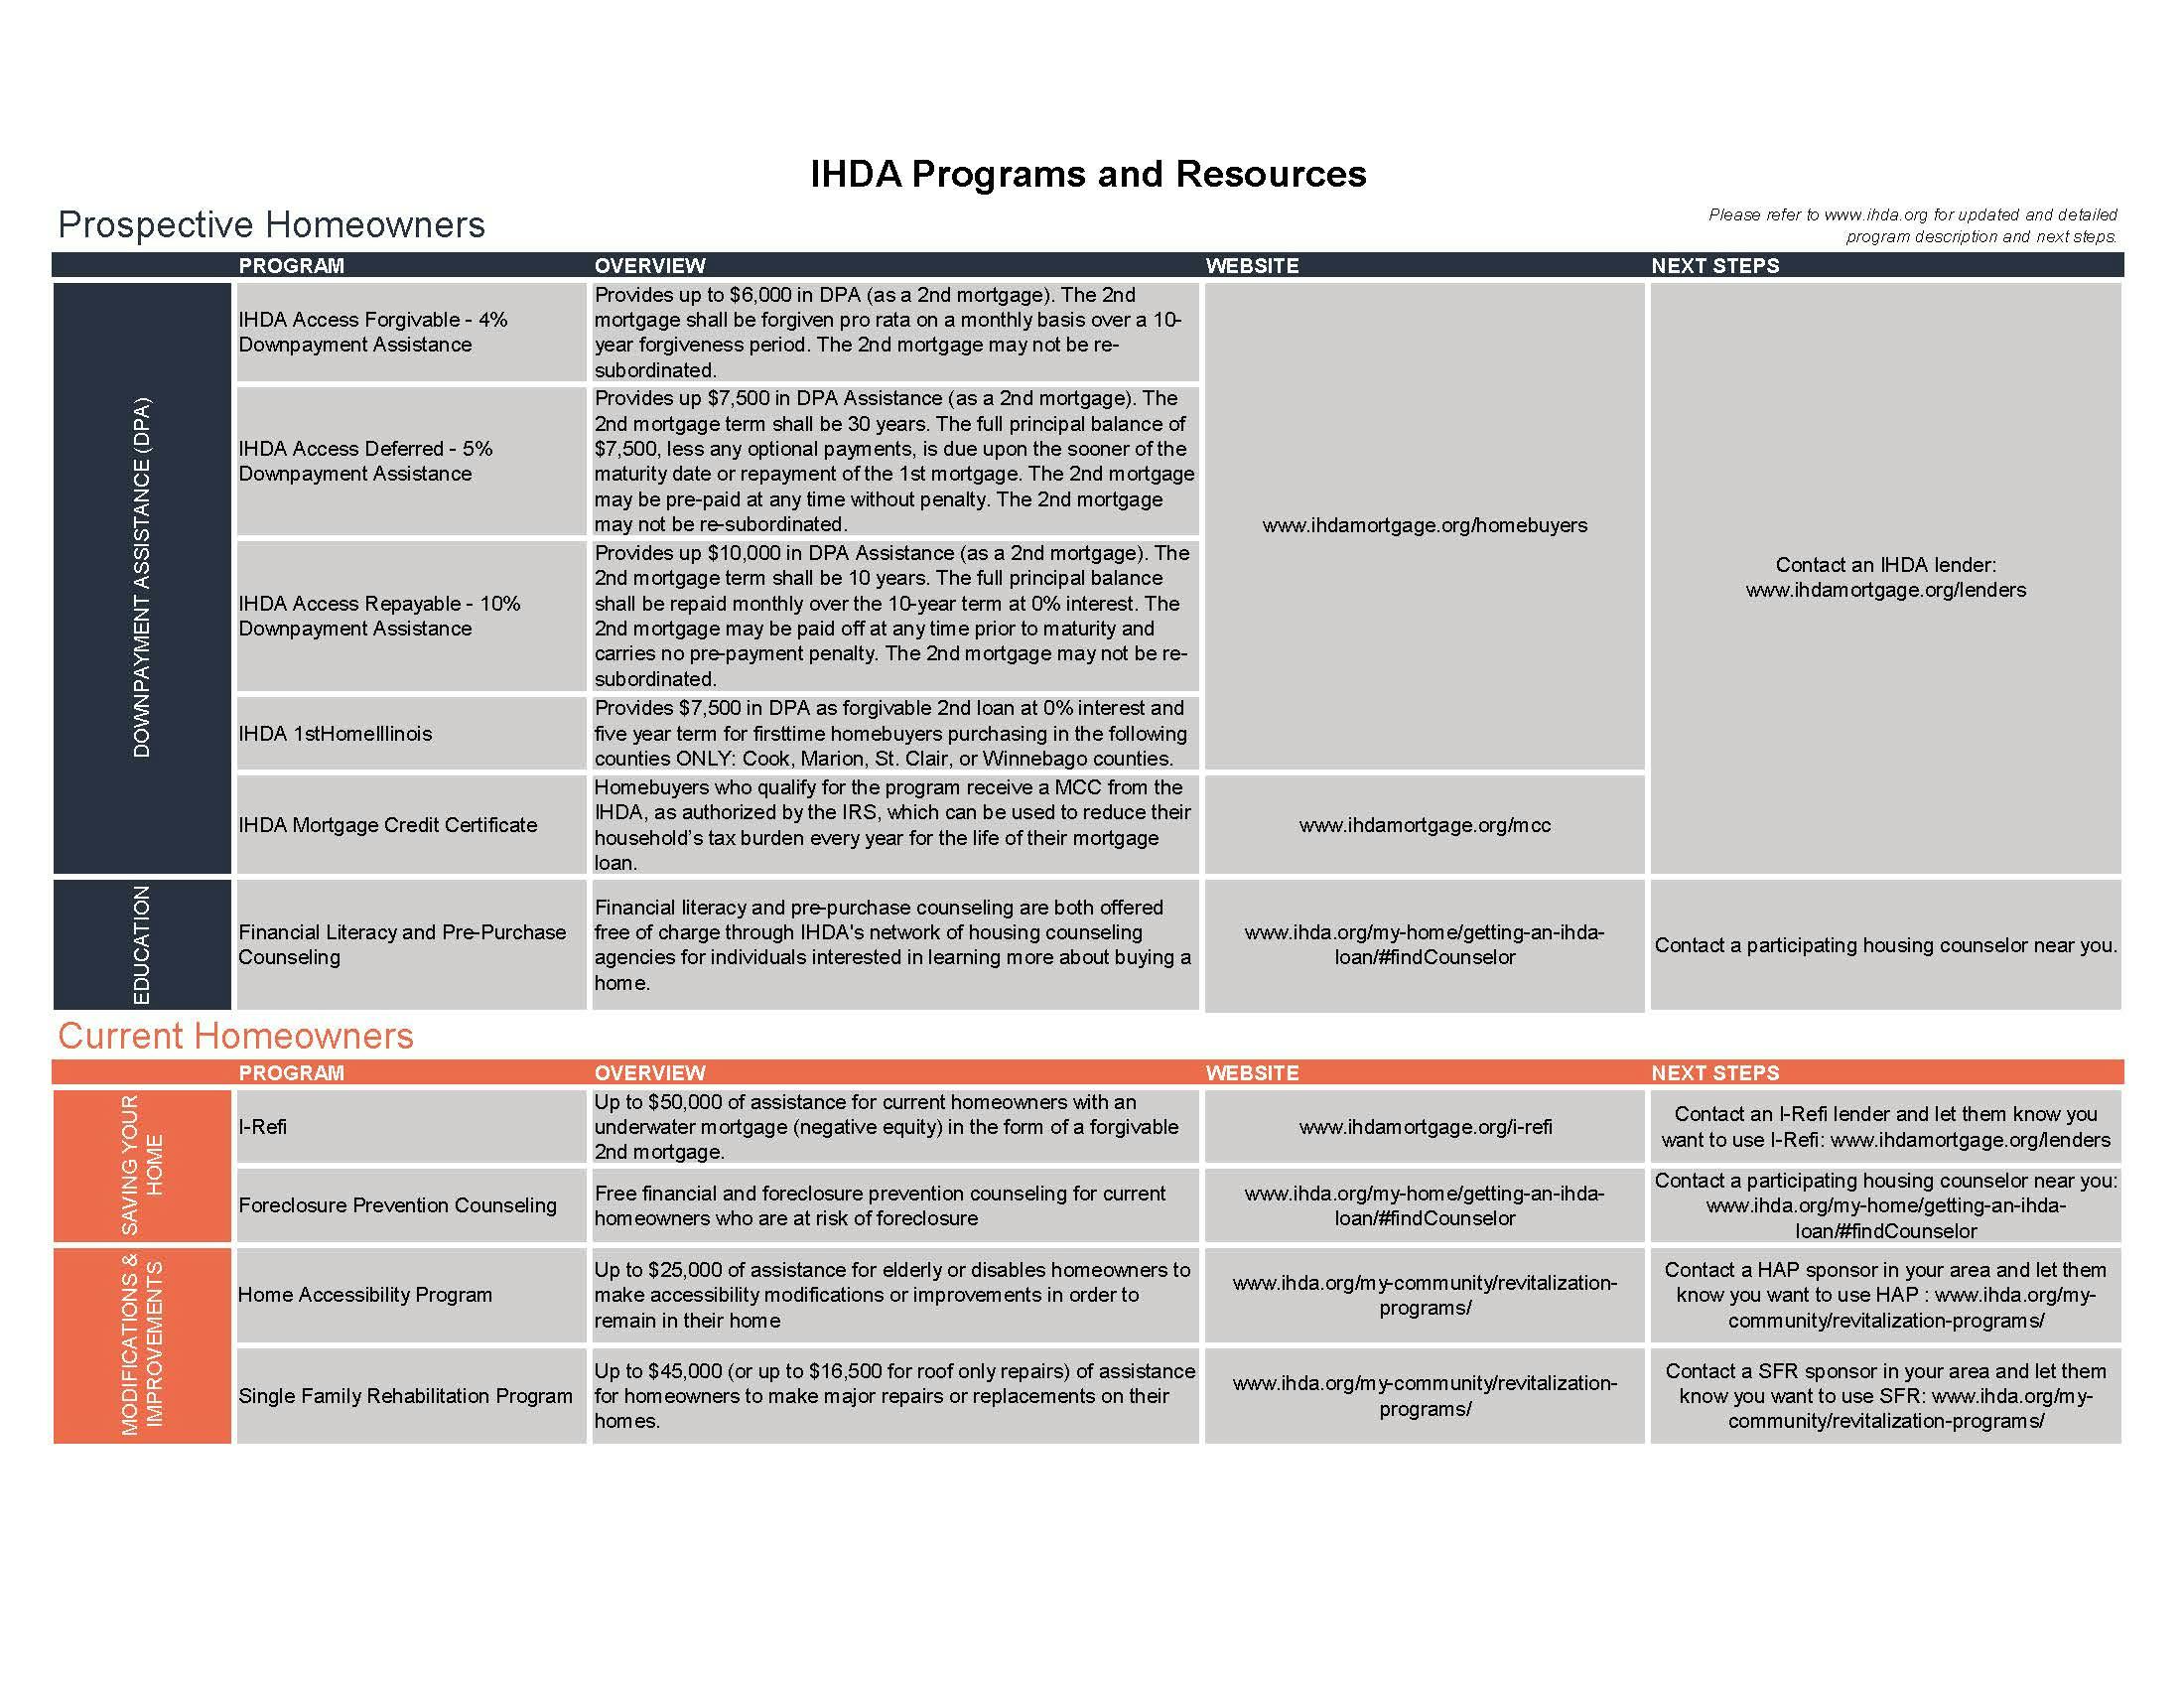 IHDA Programs and Resources Guide_Page_1.jpg